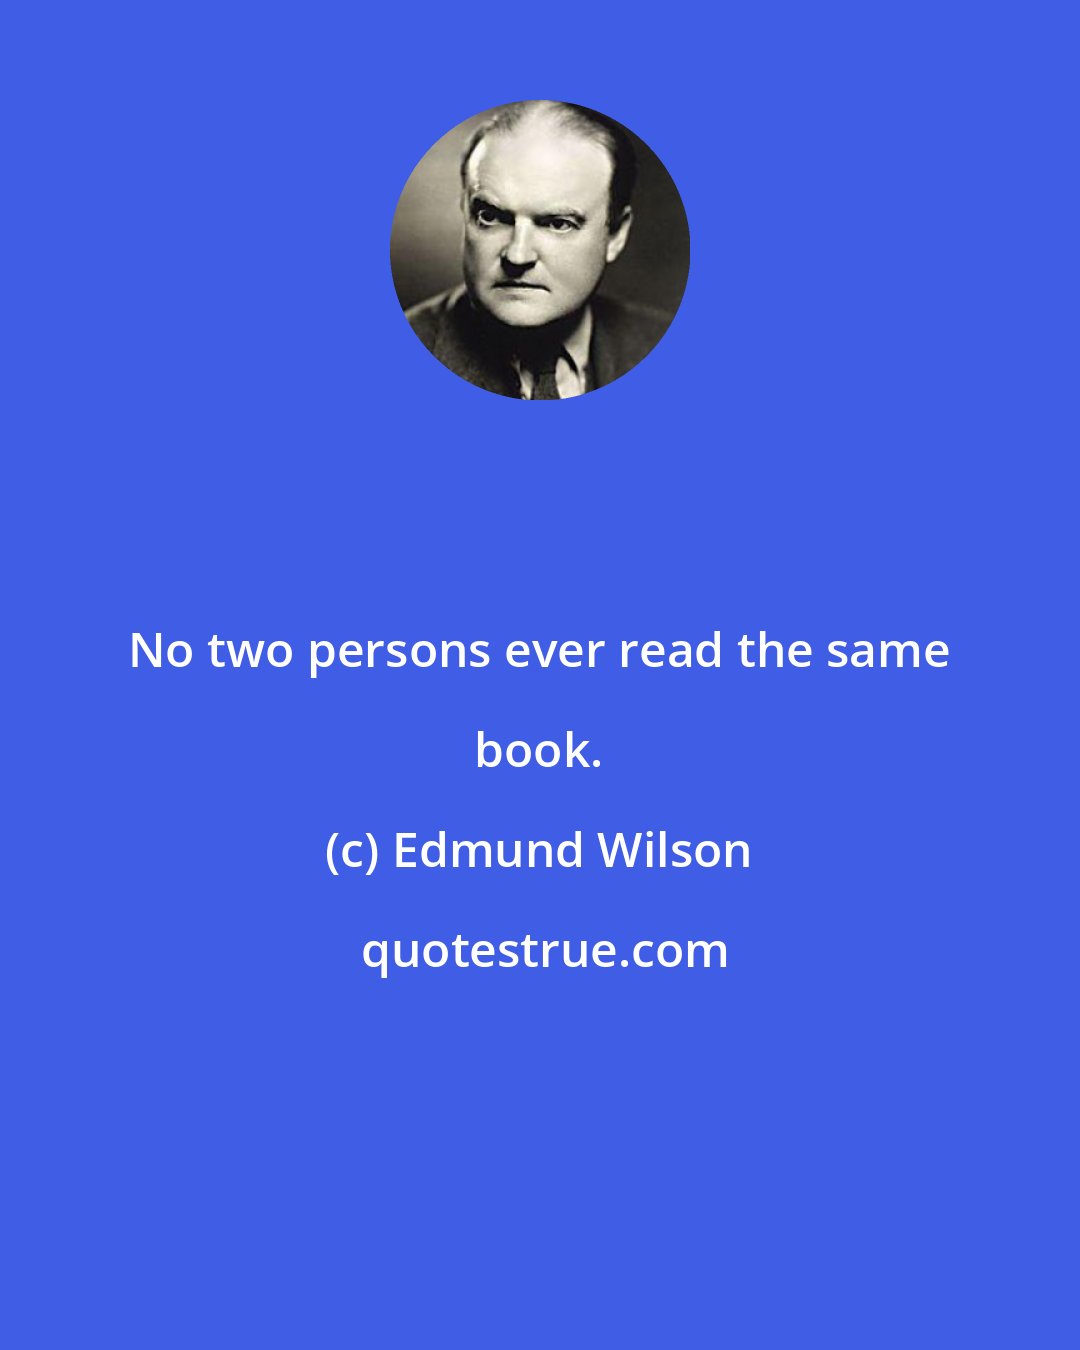 Edmund Wilson: No two persons ever read the same book.